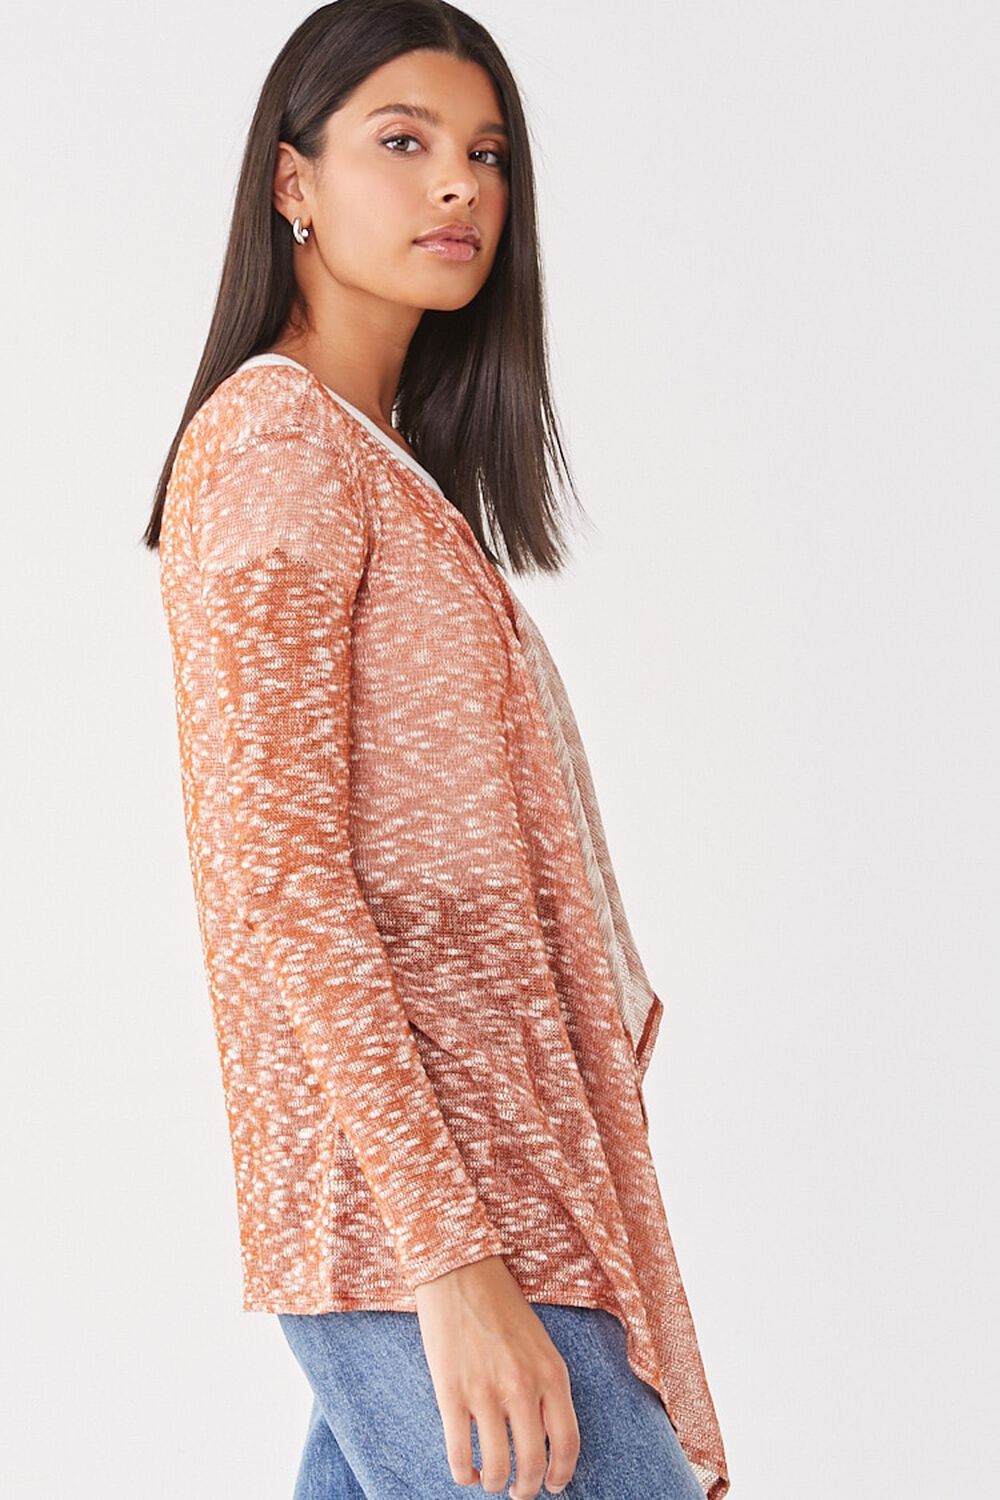 RUST Sheer Marled Open-Front Cardigan, image 2